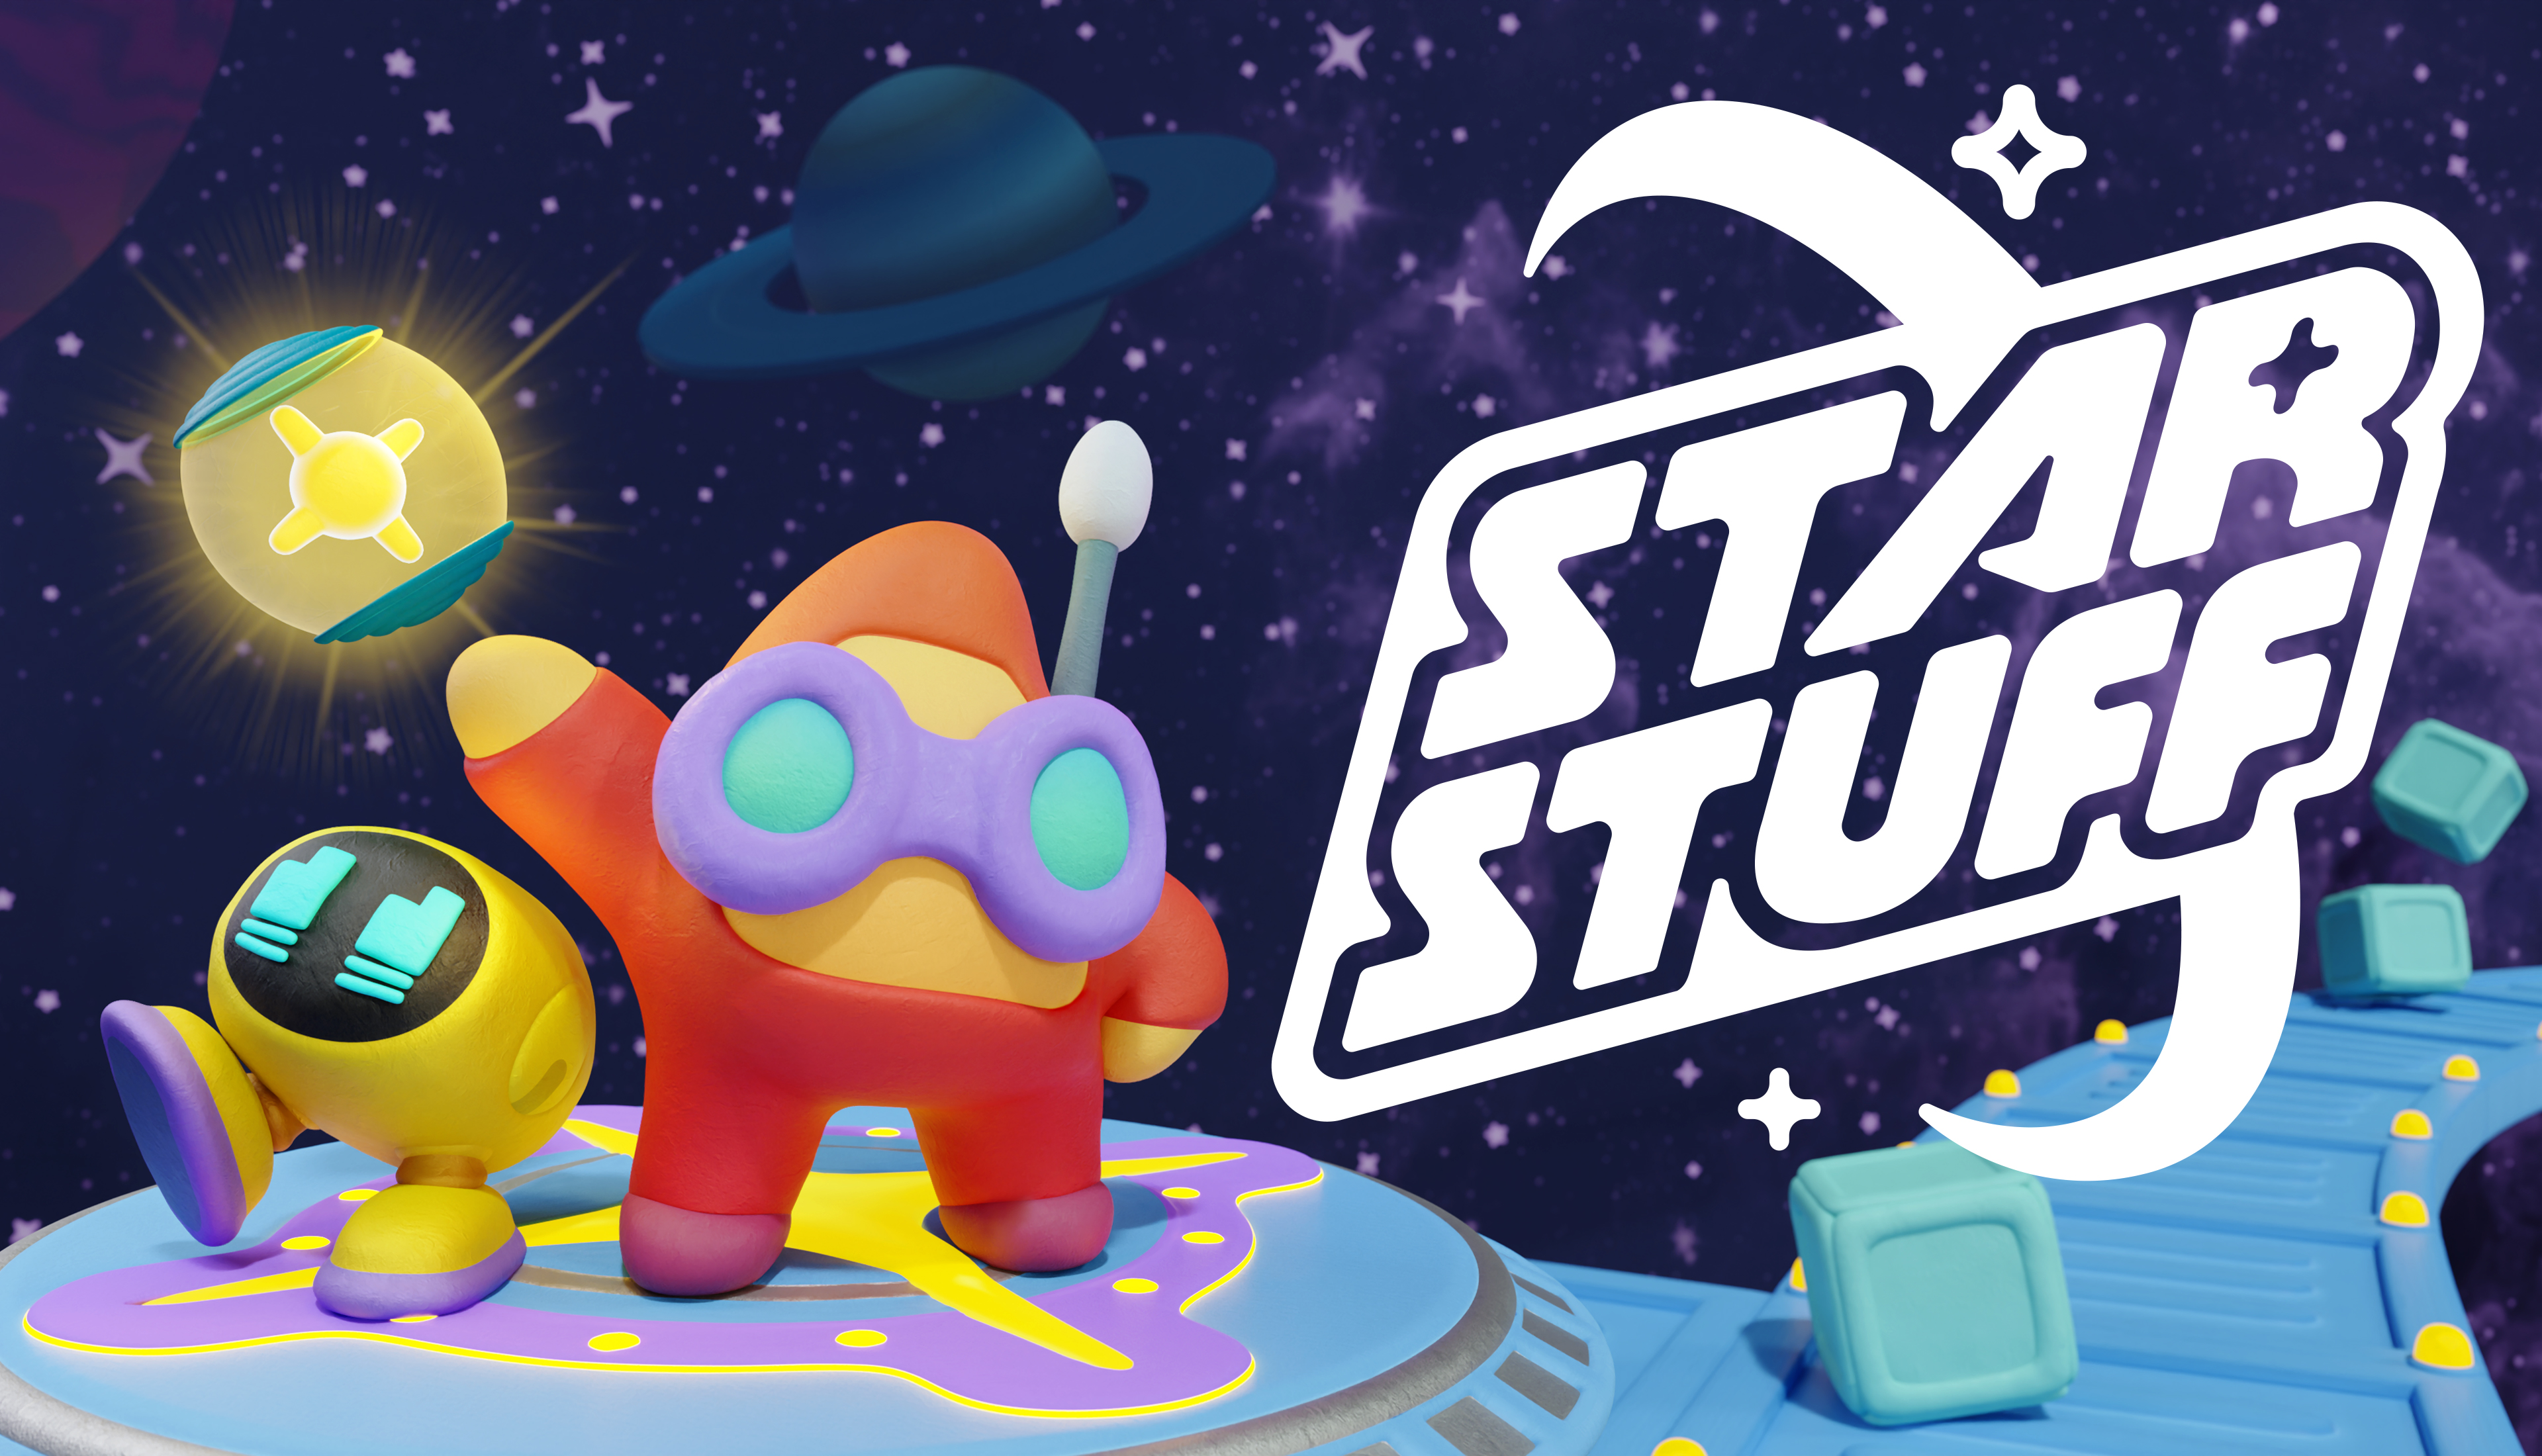 A rectangular promotional image for Star Stuff featuring a Red Star character from the game with its yellow robotic companion standing on a space platform with ringed planets in the background. 